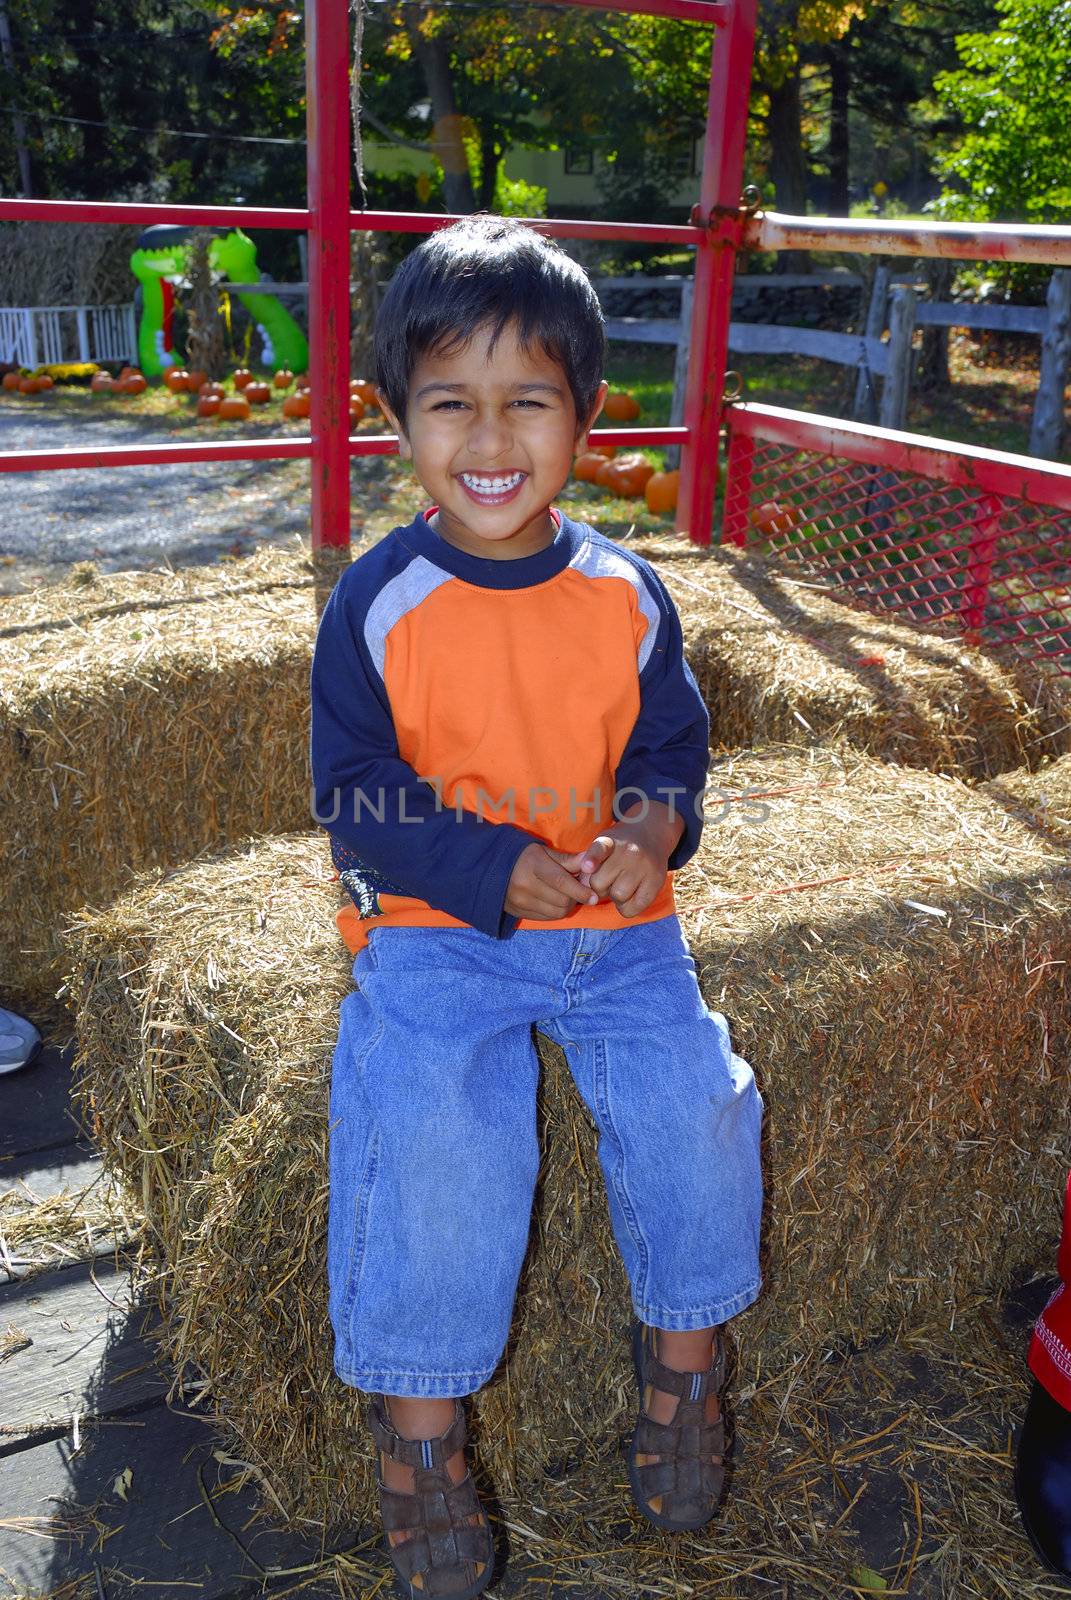 An handsome indian kid having fun with hay ride